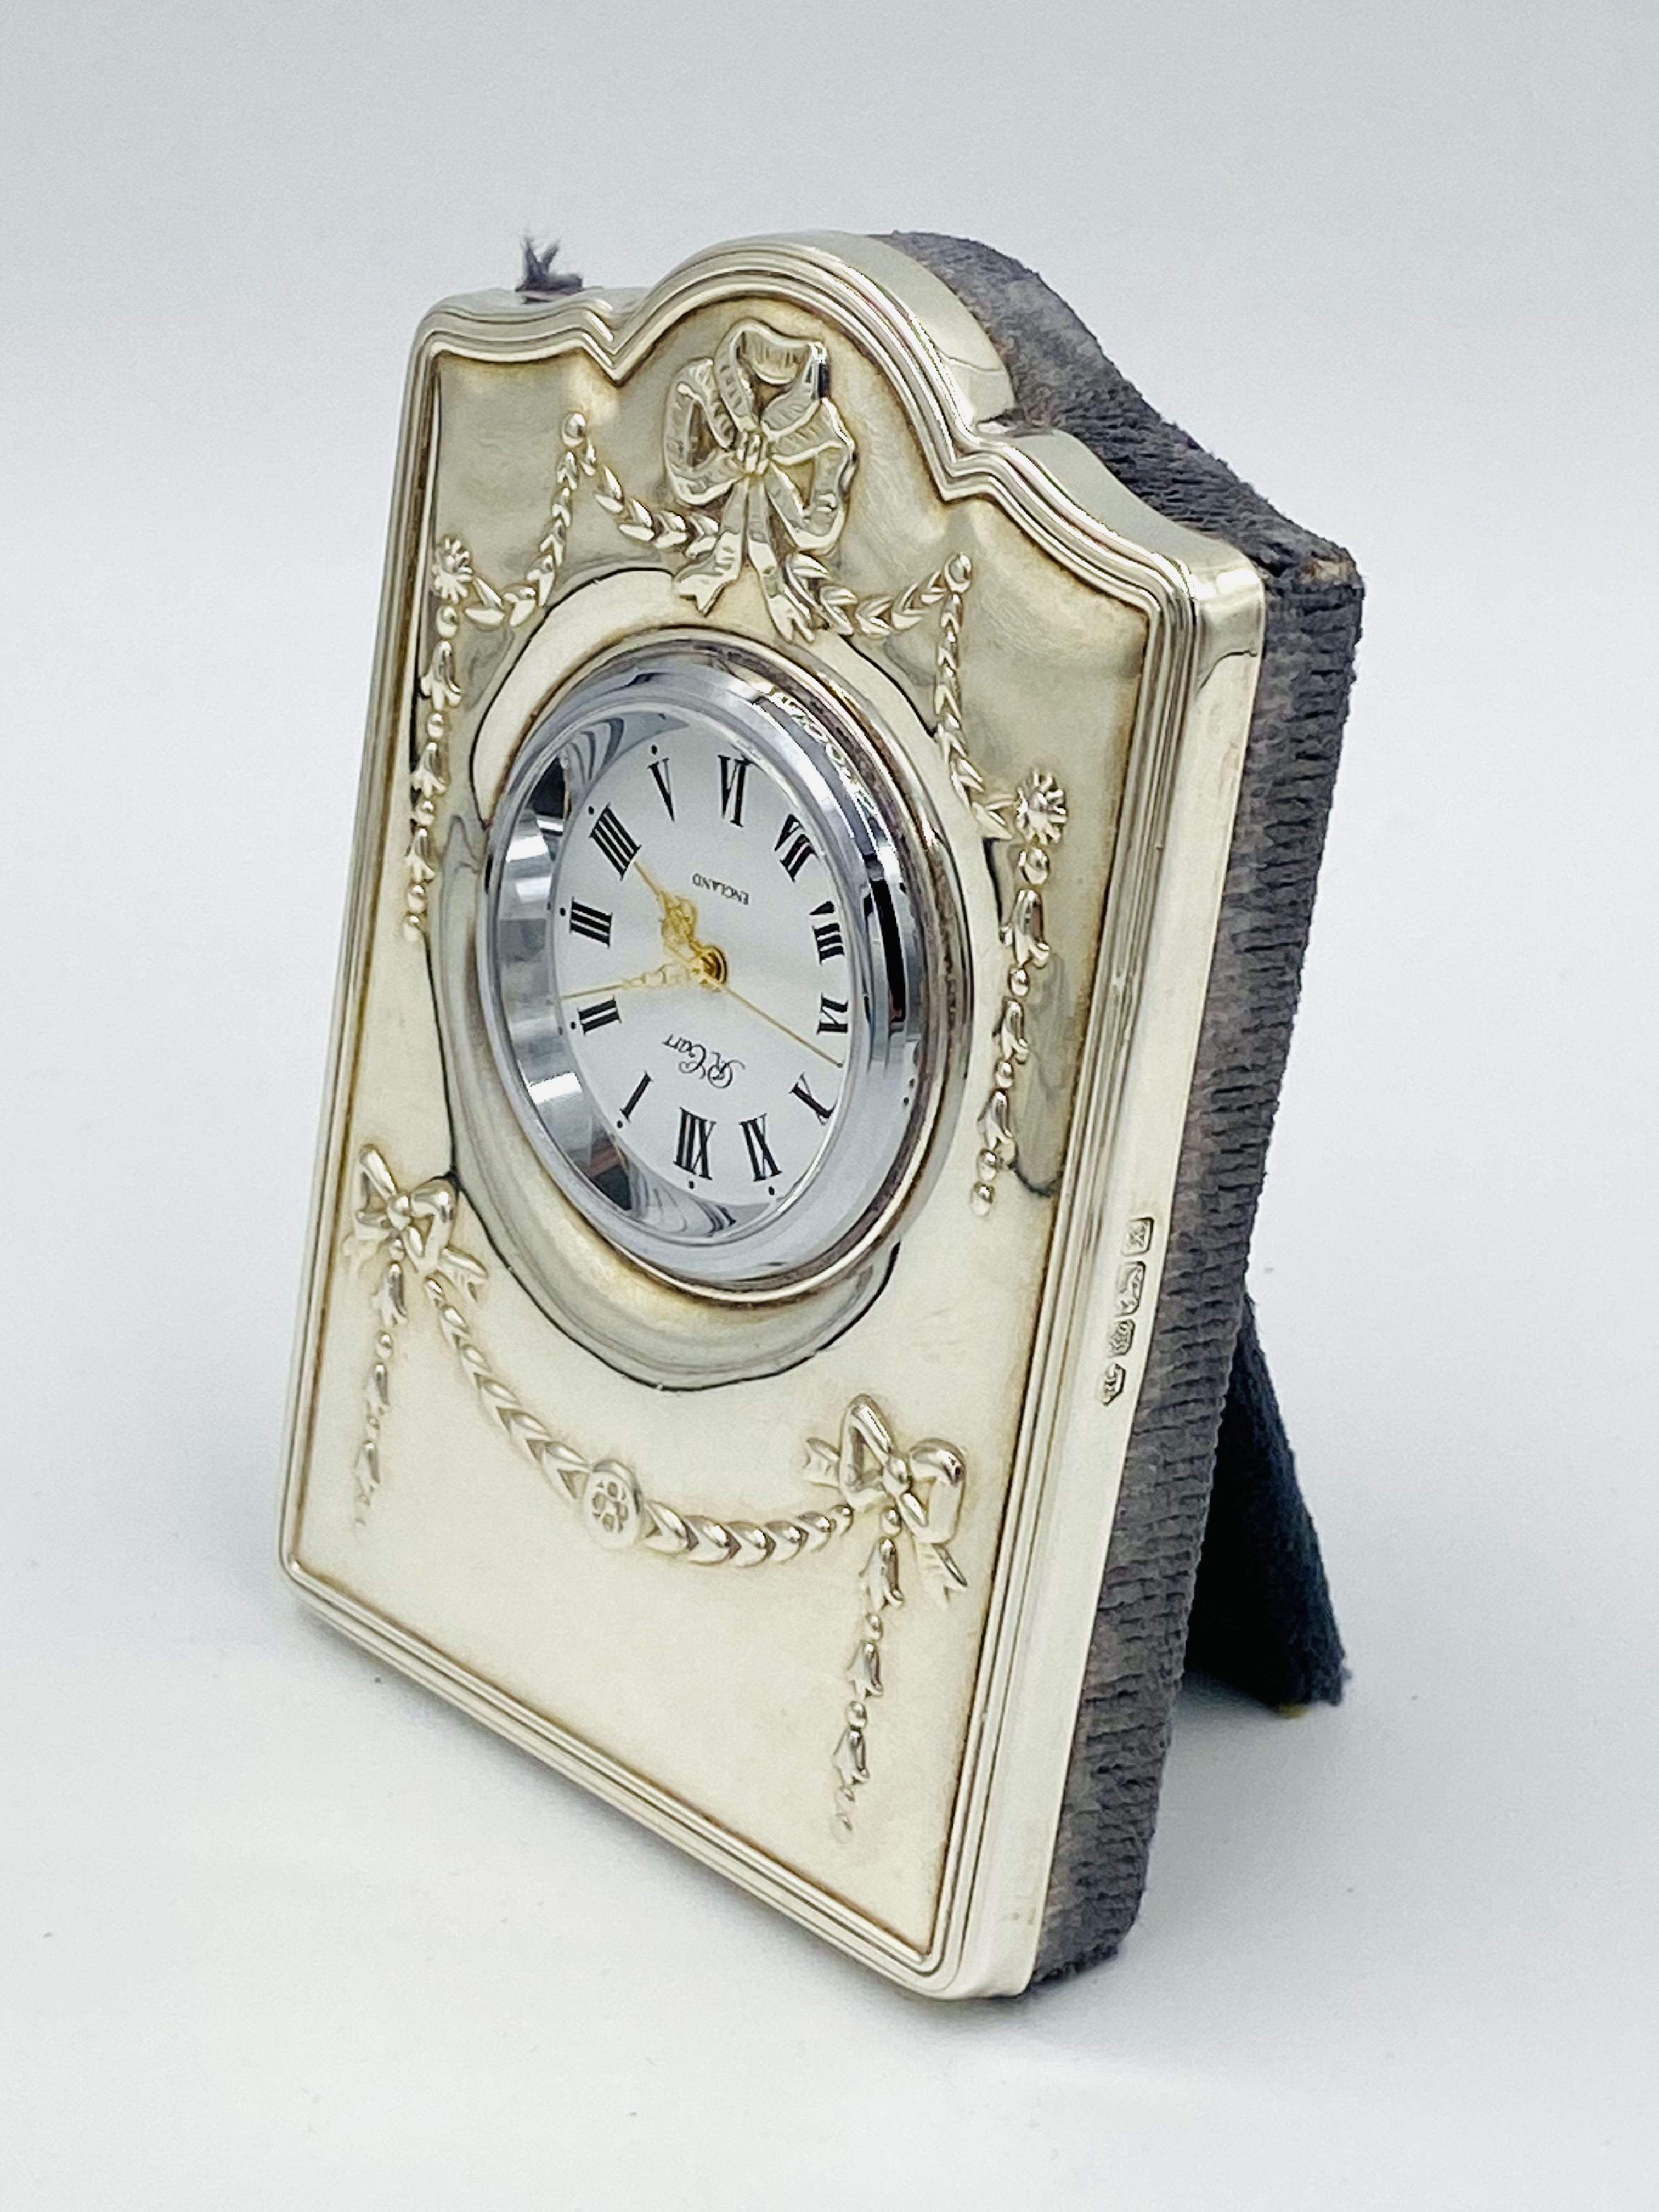 Two silver cups and a silver framed clock - Image 5 of 6